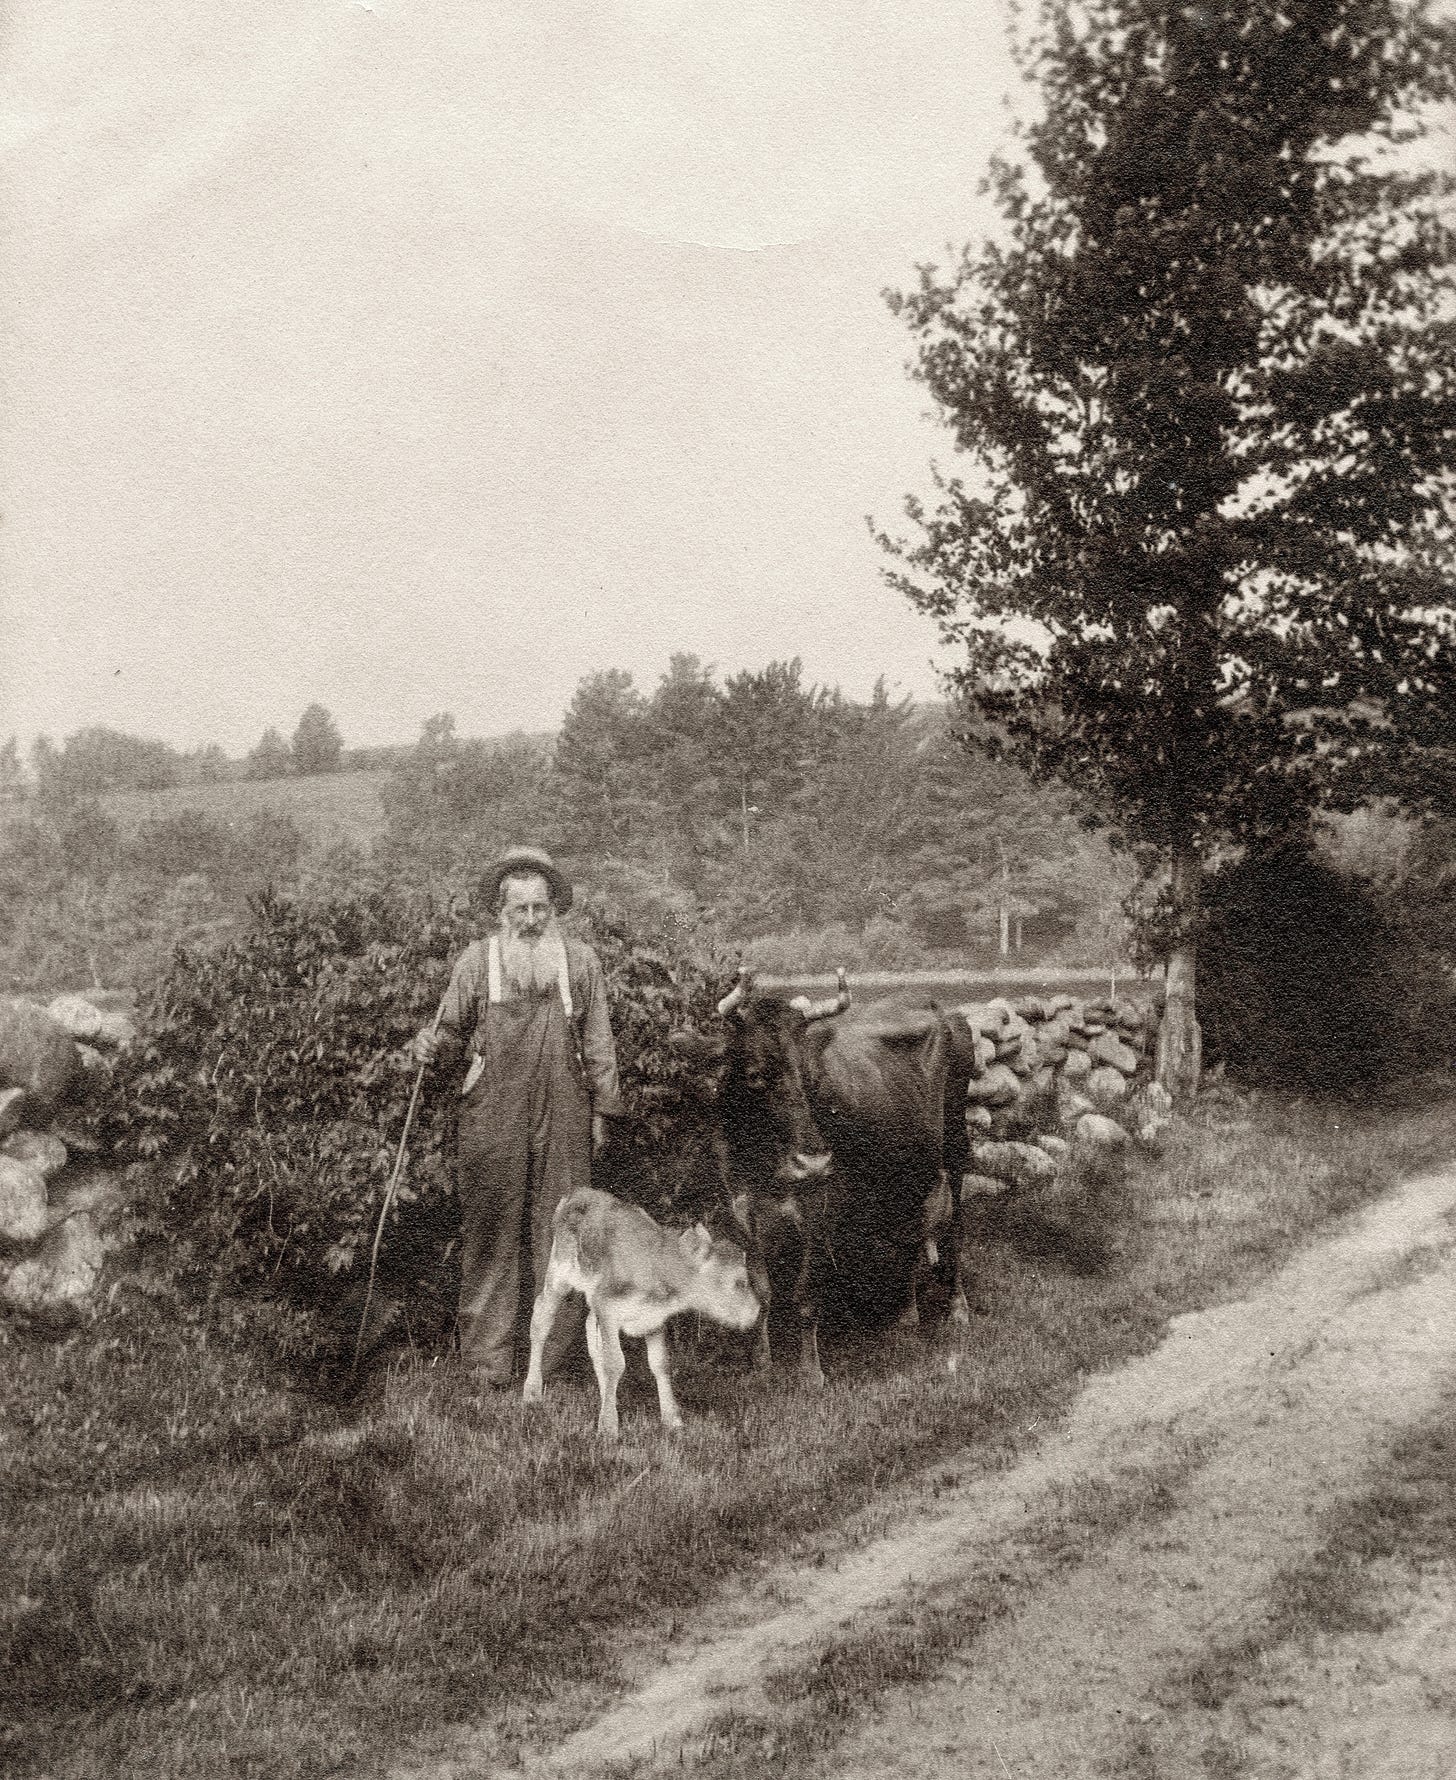 George Weston with cows